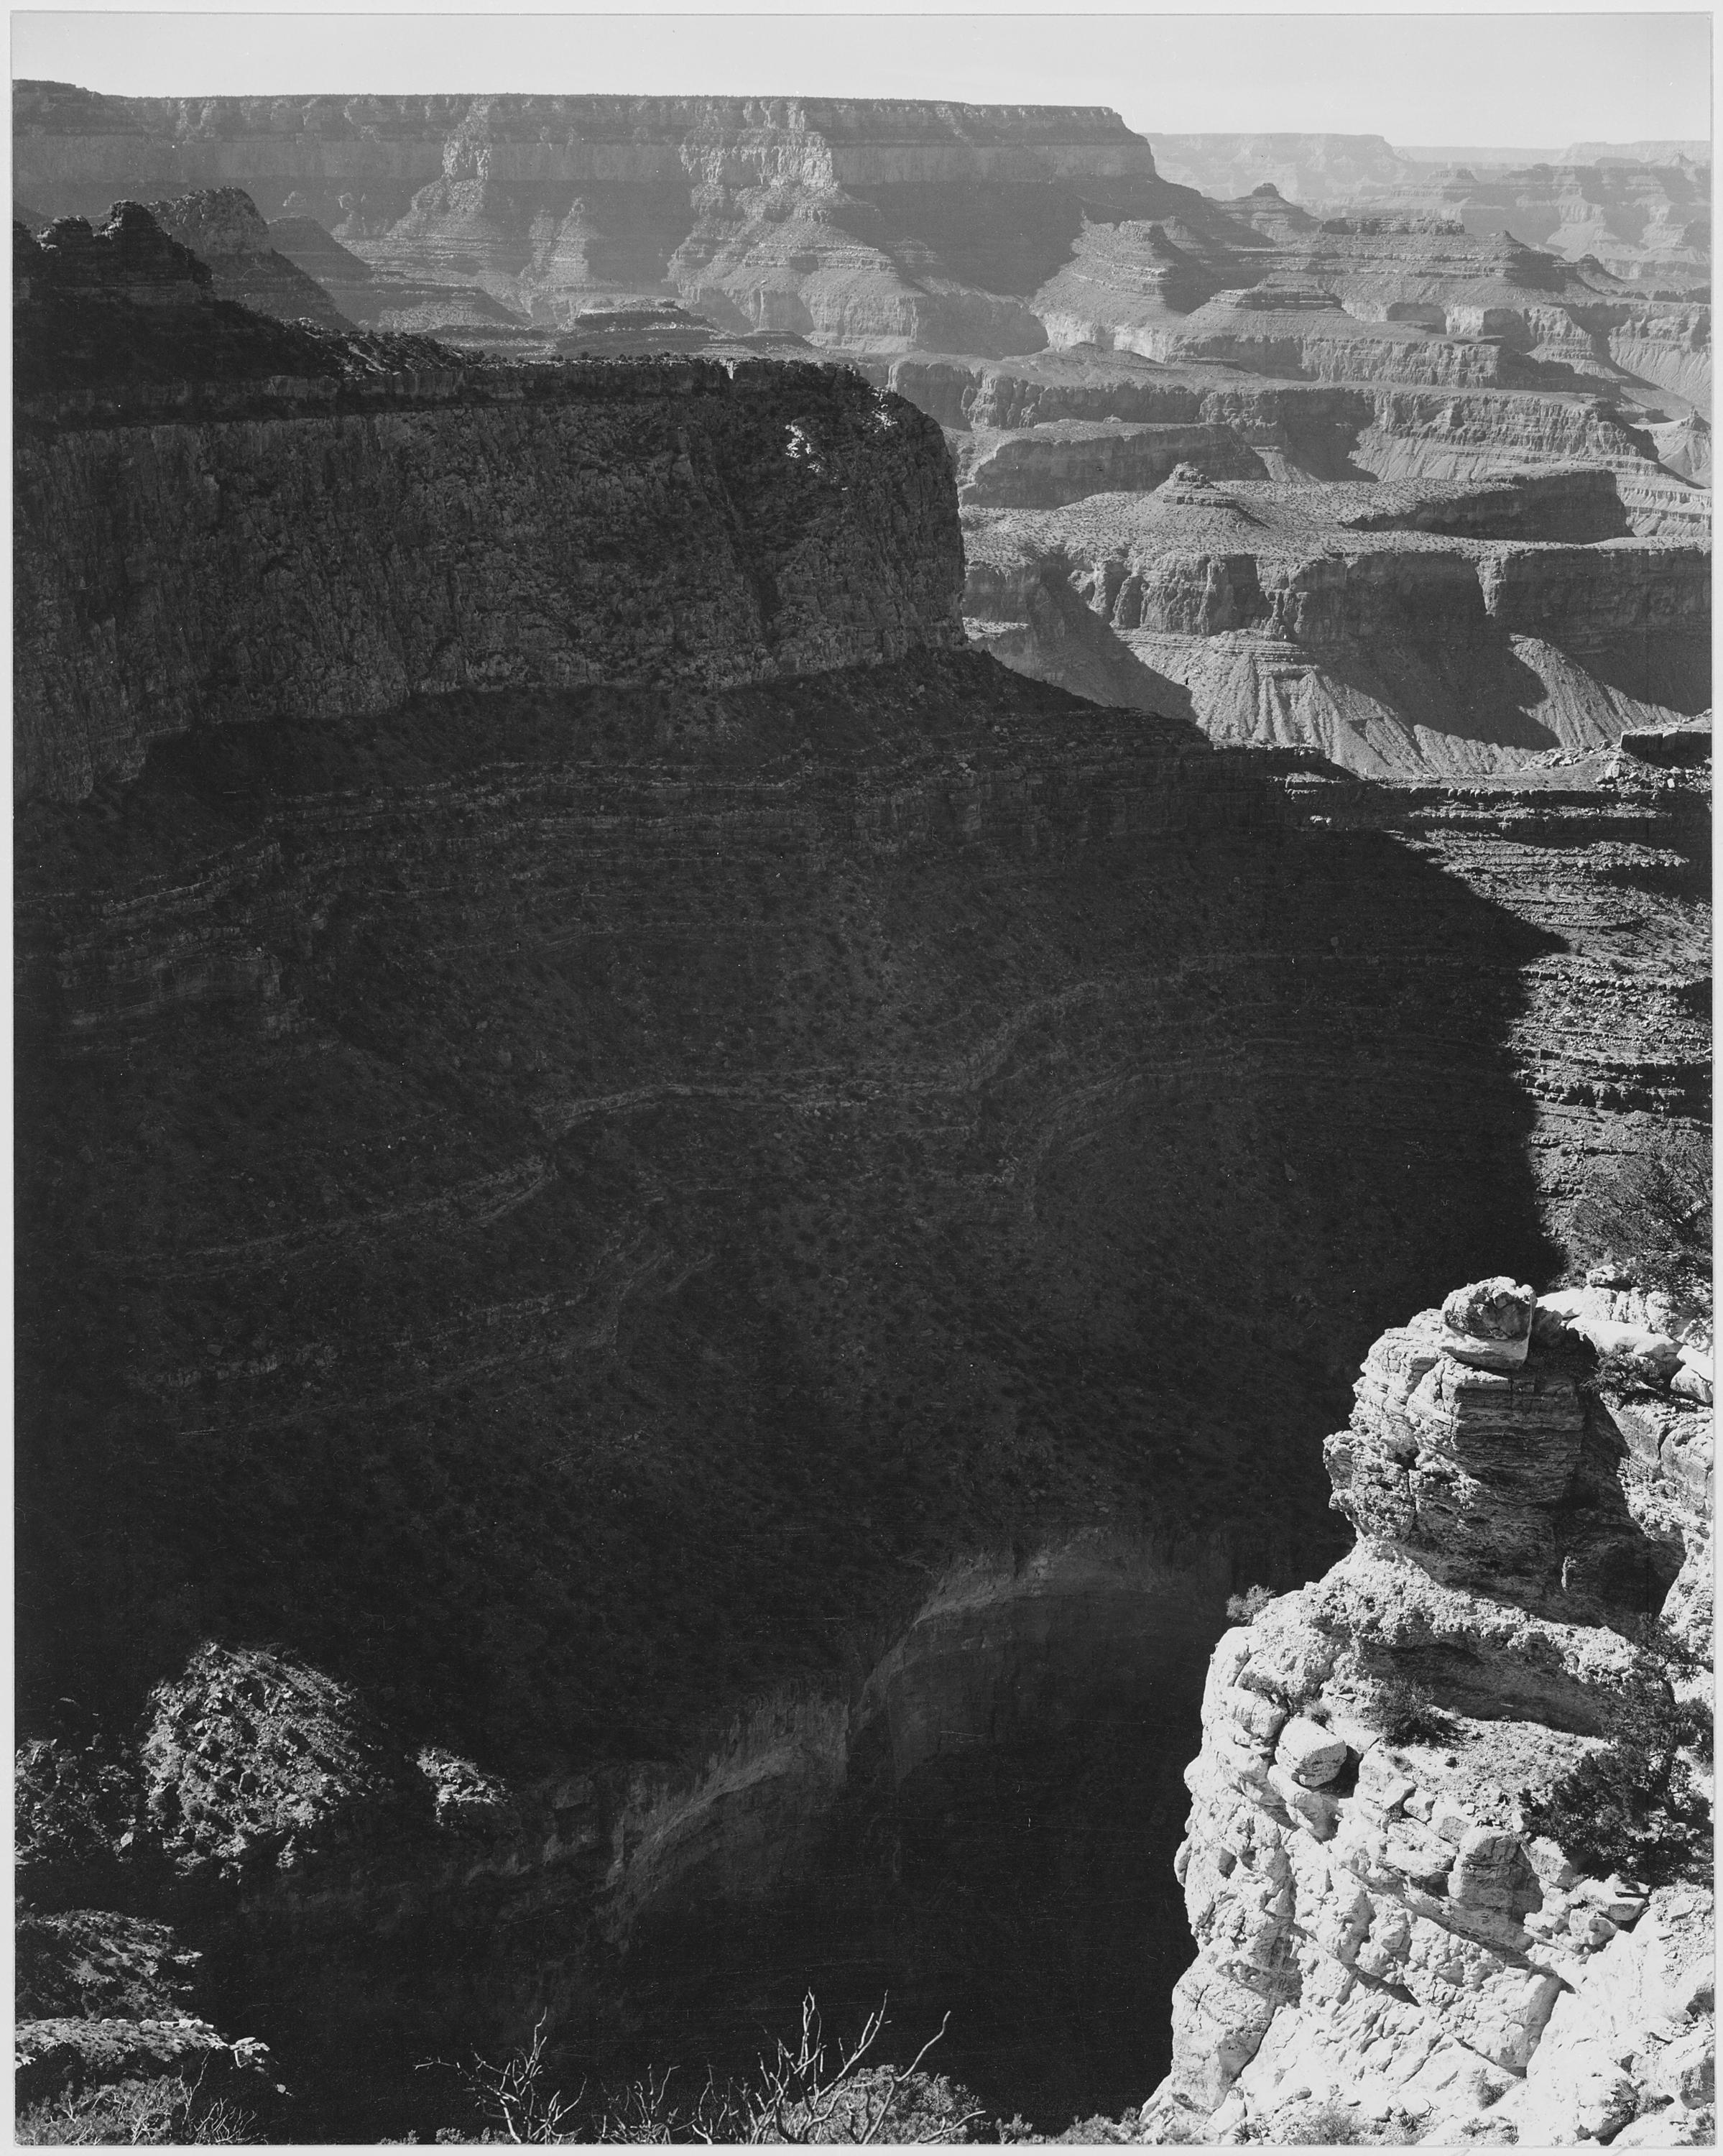 Ansel Adams - National Archives 79-AA-F15